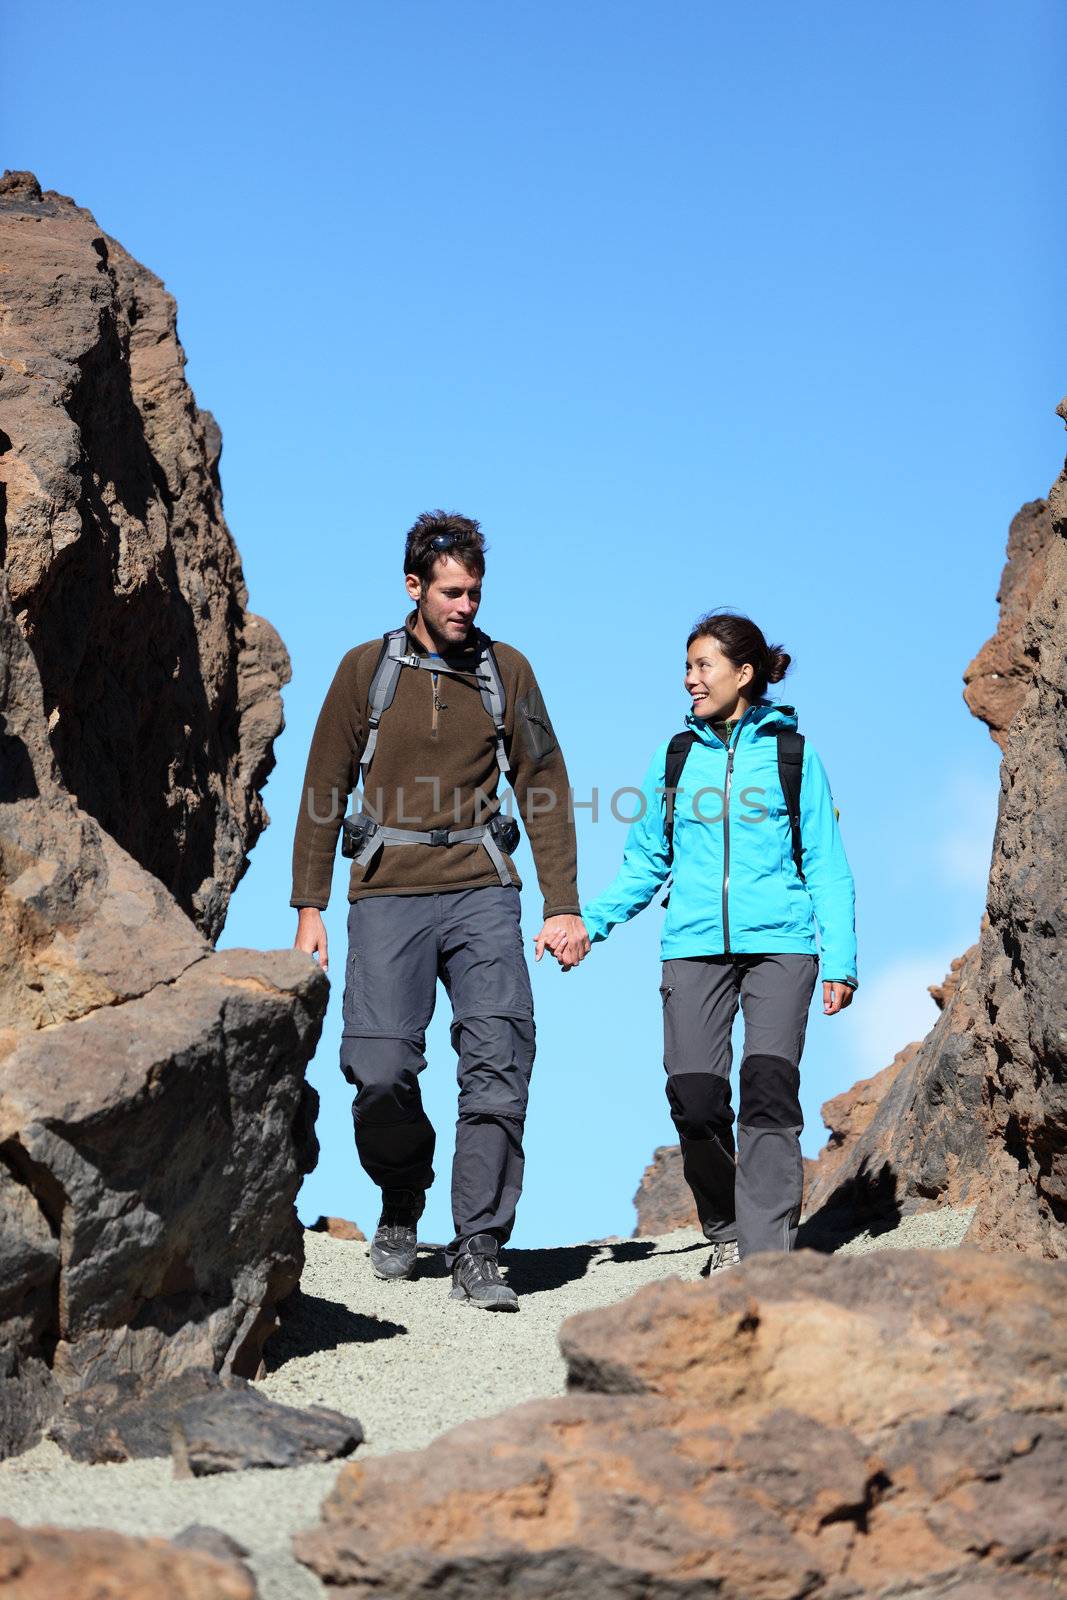 Young couple hiking outdoors holding hands talking during hike trip in beautiful volcano landscape on Teide, Tenerife, Canary Islands.